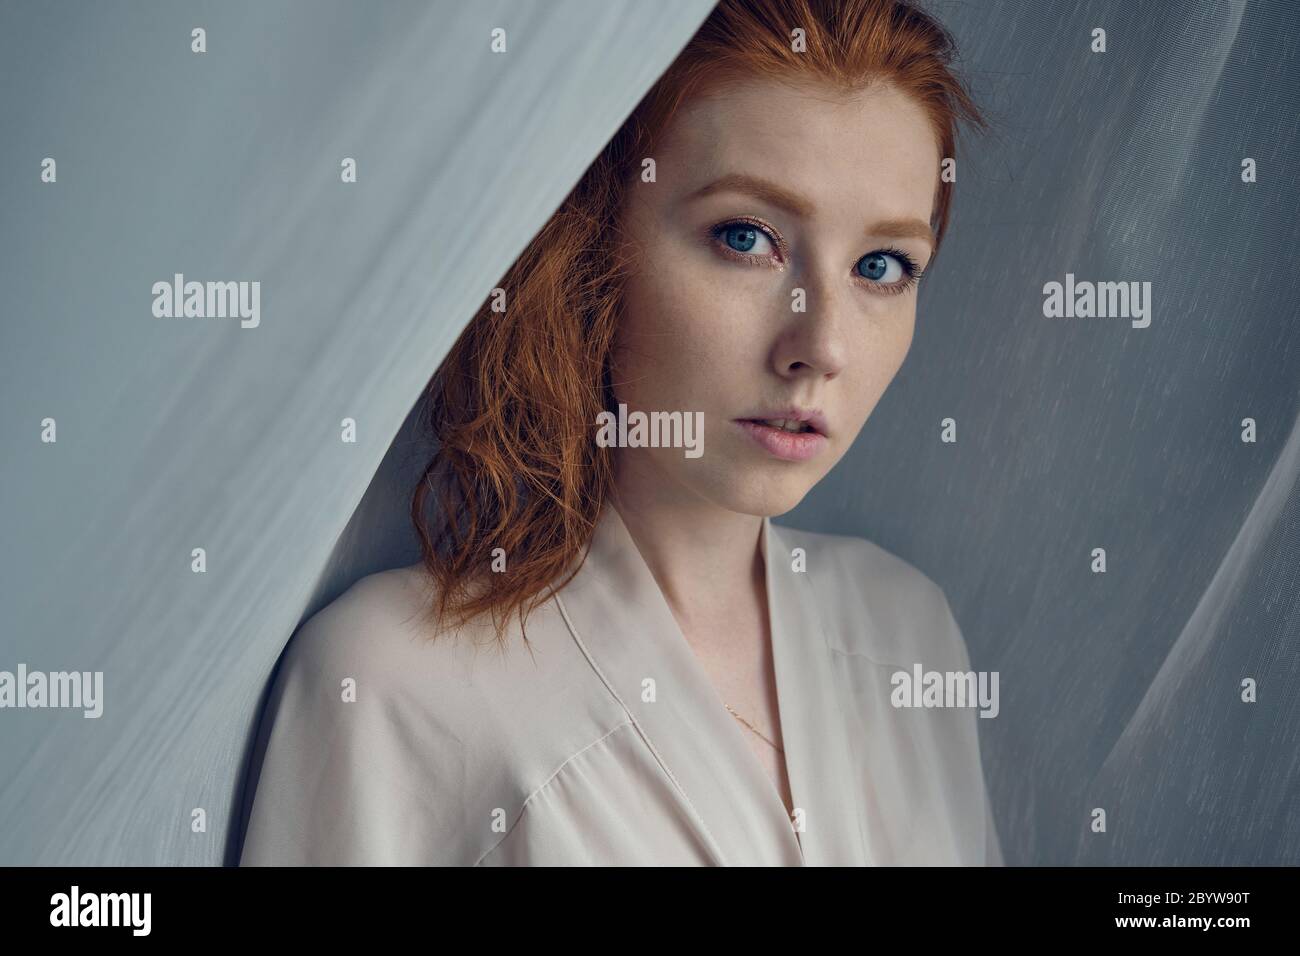 A red-haired girl with blue eyes stands against a white translucent curtain and looks into the frame. Stock Photo